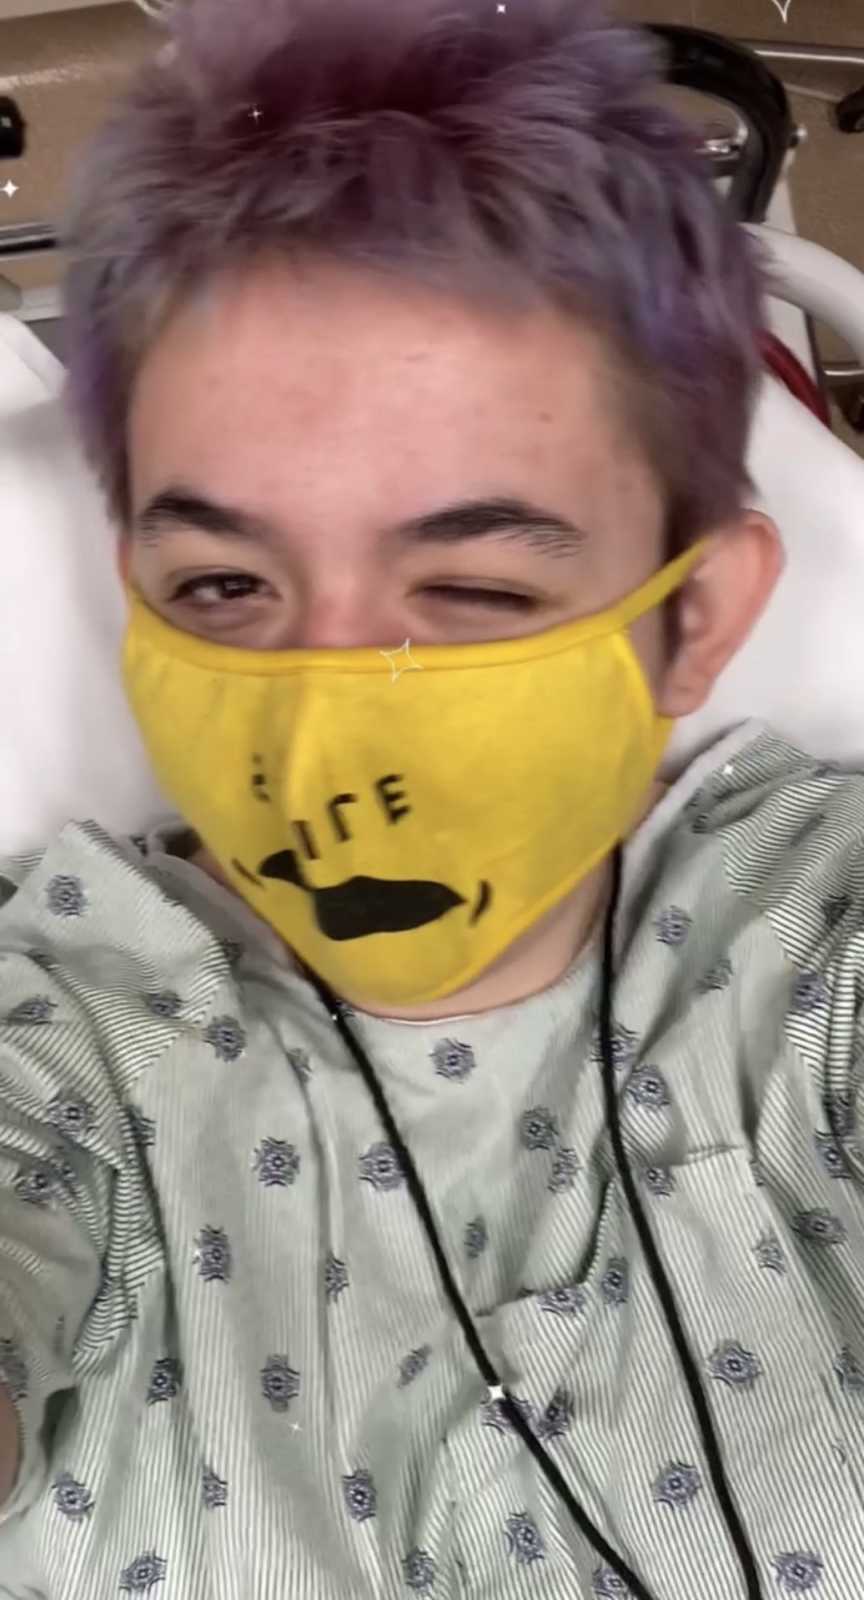 teen in hospital scrubs and yellow mask winking